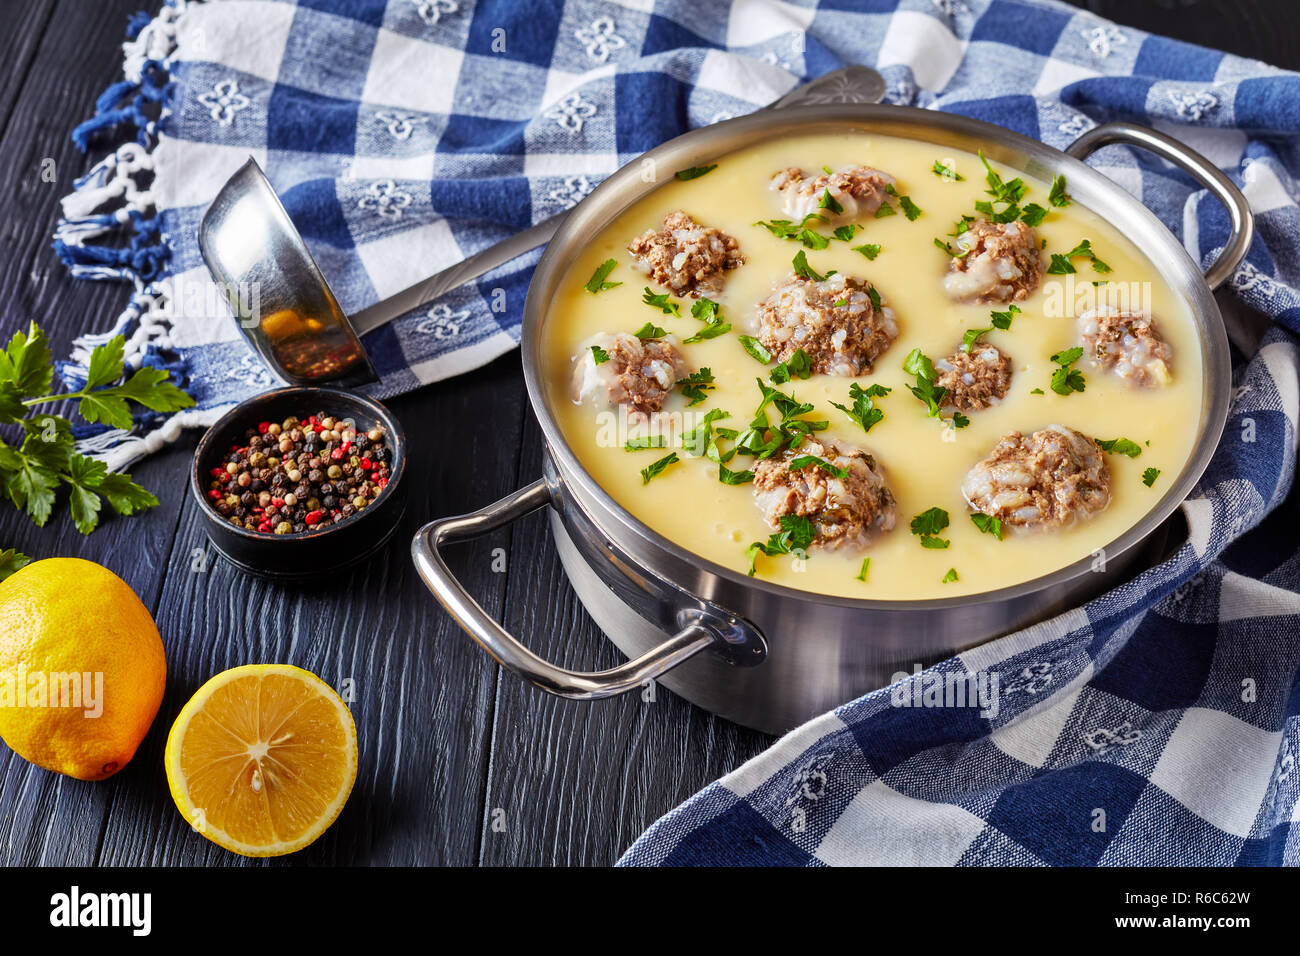 https://c8.alamy.com/comp/R6C62W/close-up-of-classic-greek-meatball-soup-giouvarlakia-youvarlakia-in-egg-lemon-sauce-in-a-metal-casserole-on-a-wooden-table-with-kitchen-towel-and-l-R6C62W.jpg